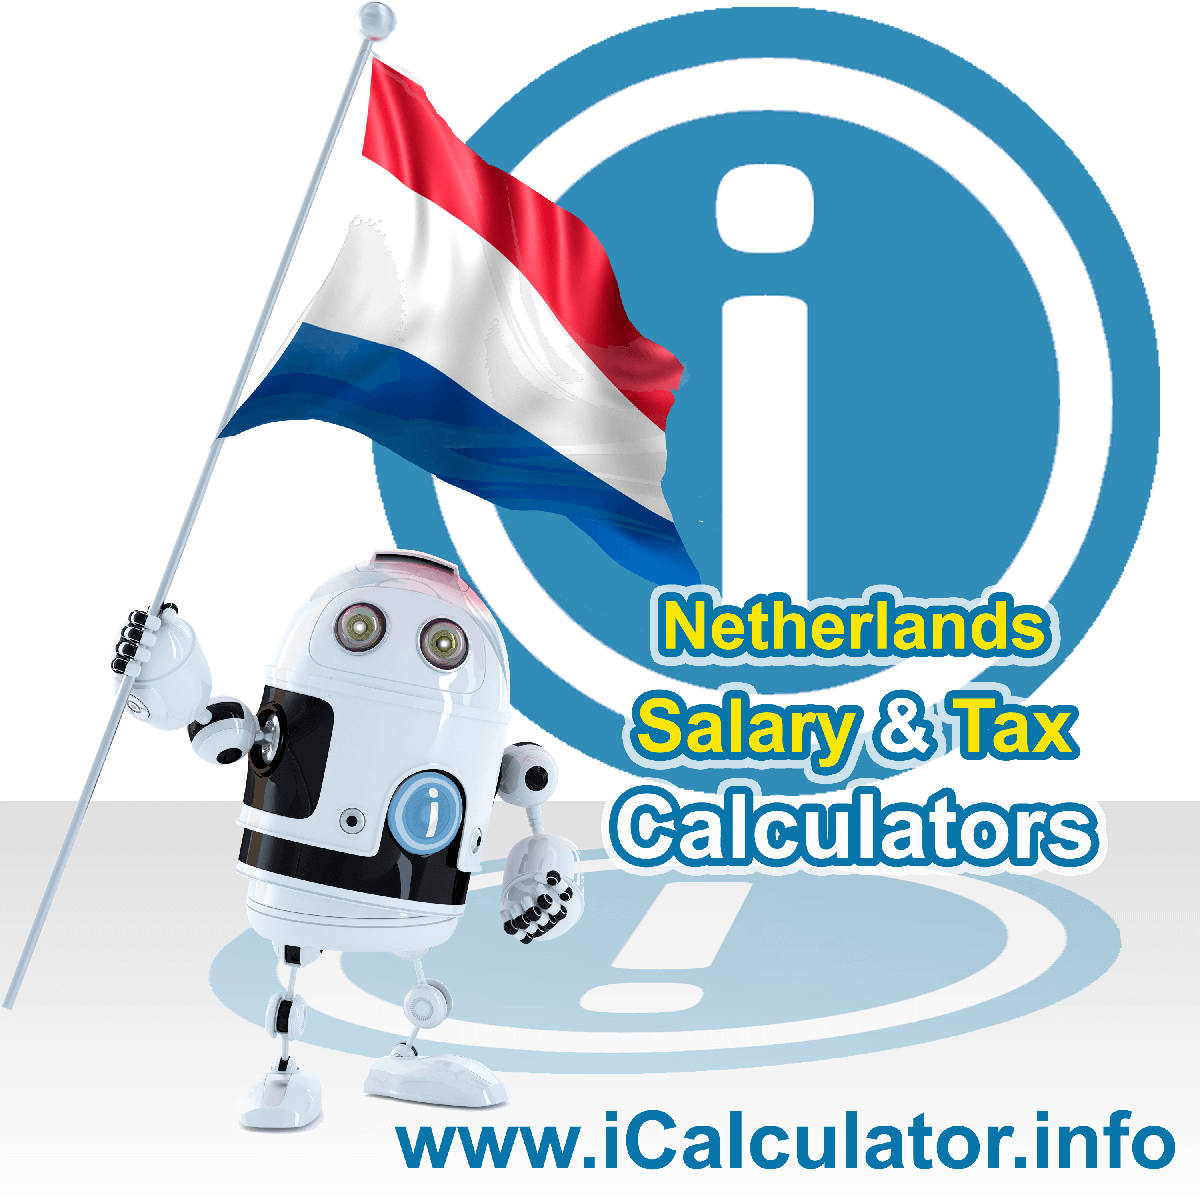 Netherlands Tax Calculator. This image shows the Netherlands flag and information relating to the tax formula for the Netherlands Salary Calculator